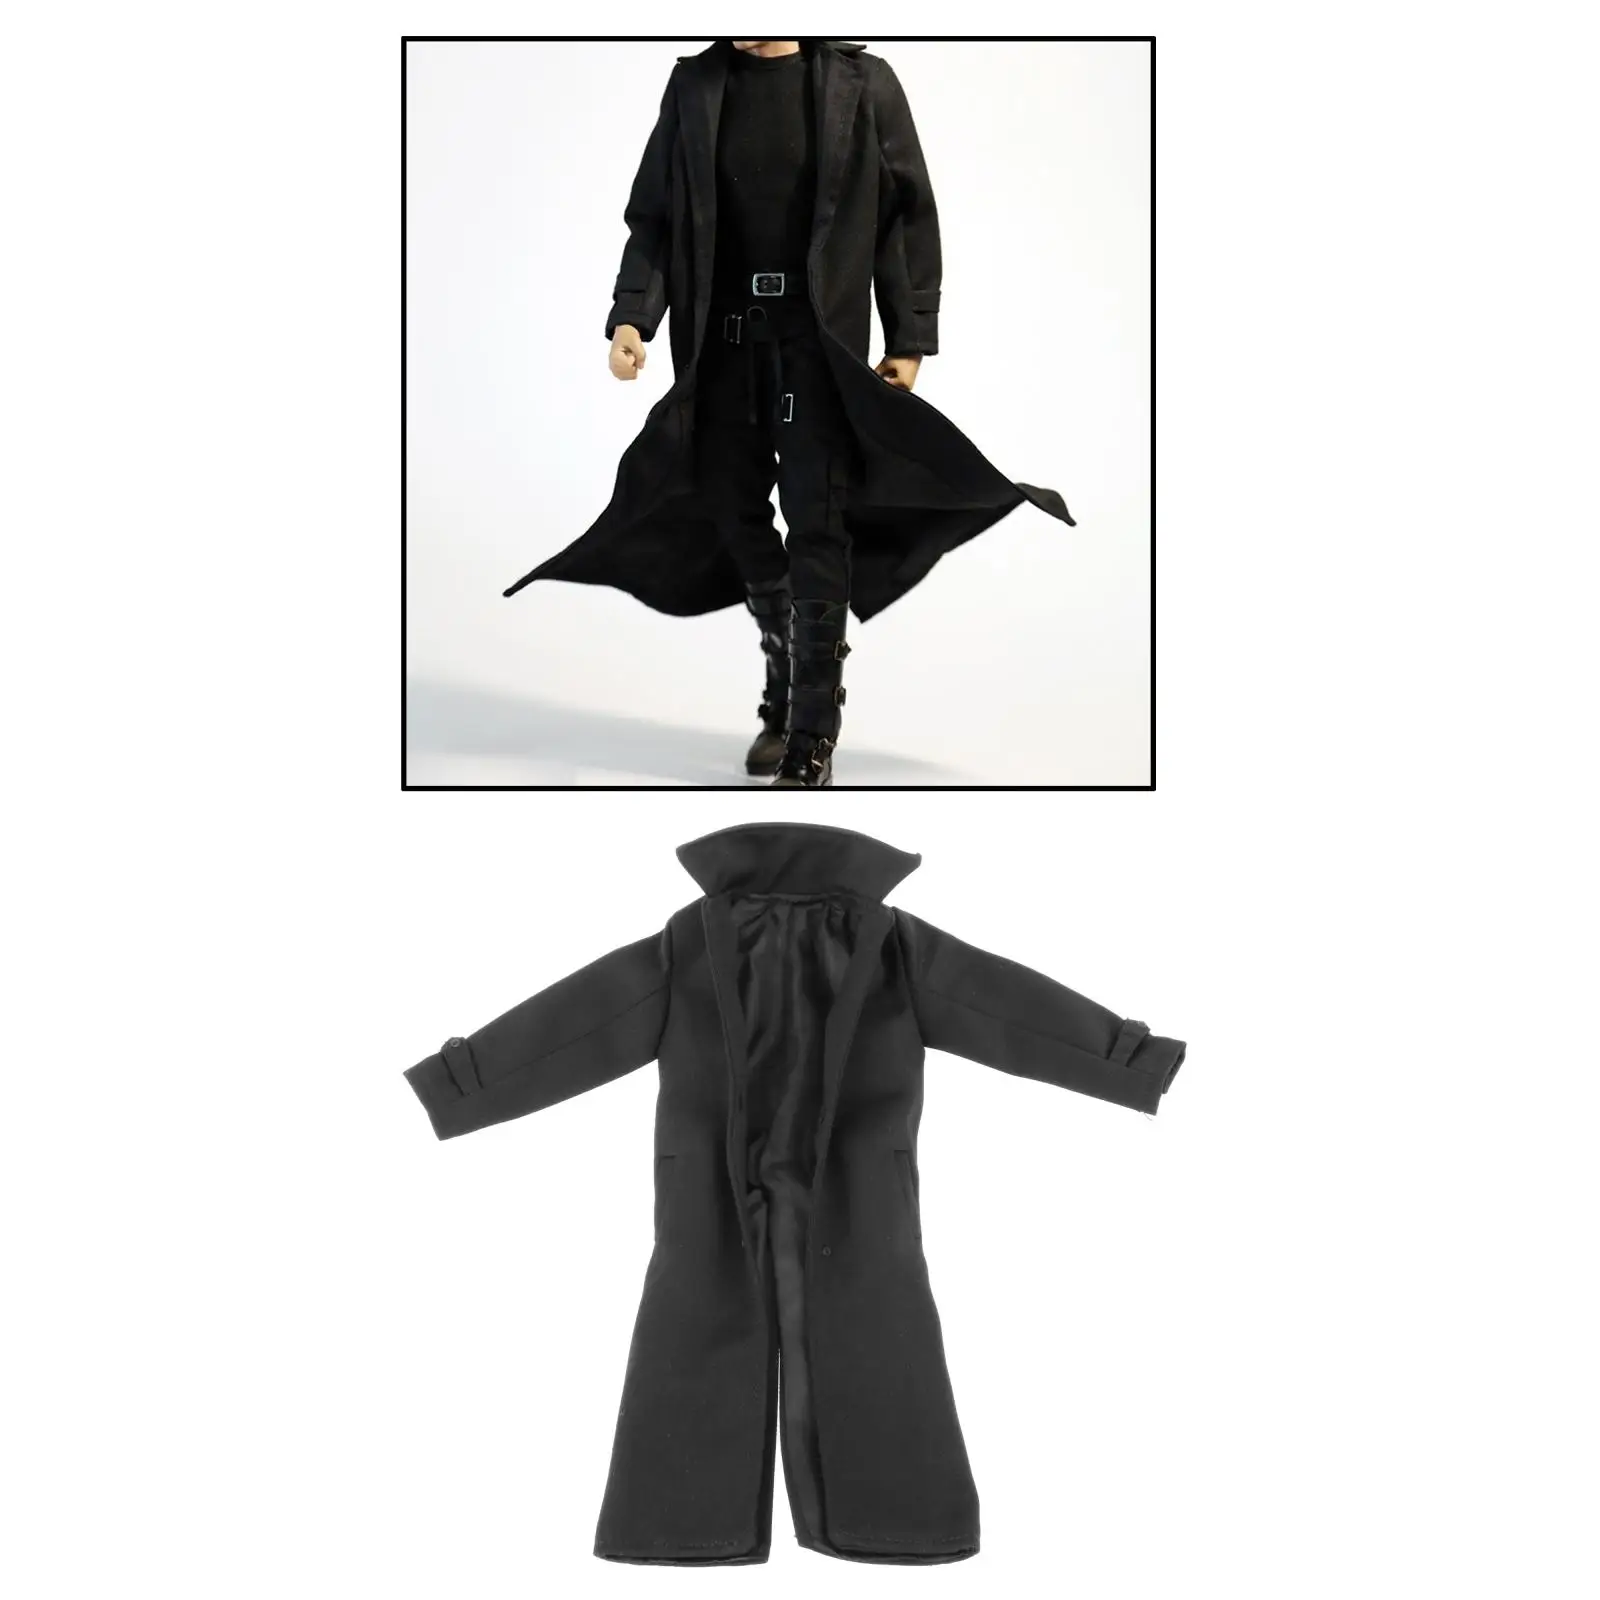 1/6 Scale Trench Coat for Hot Stuff TTL Enterbay 12`` Man Action Figures Body Clothes Accs